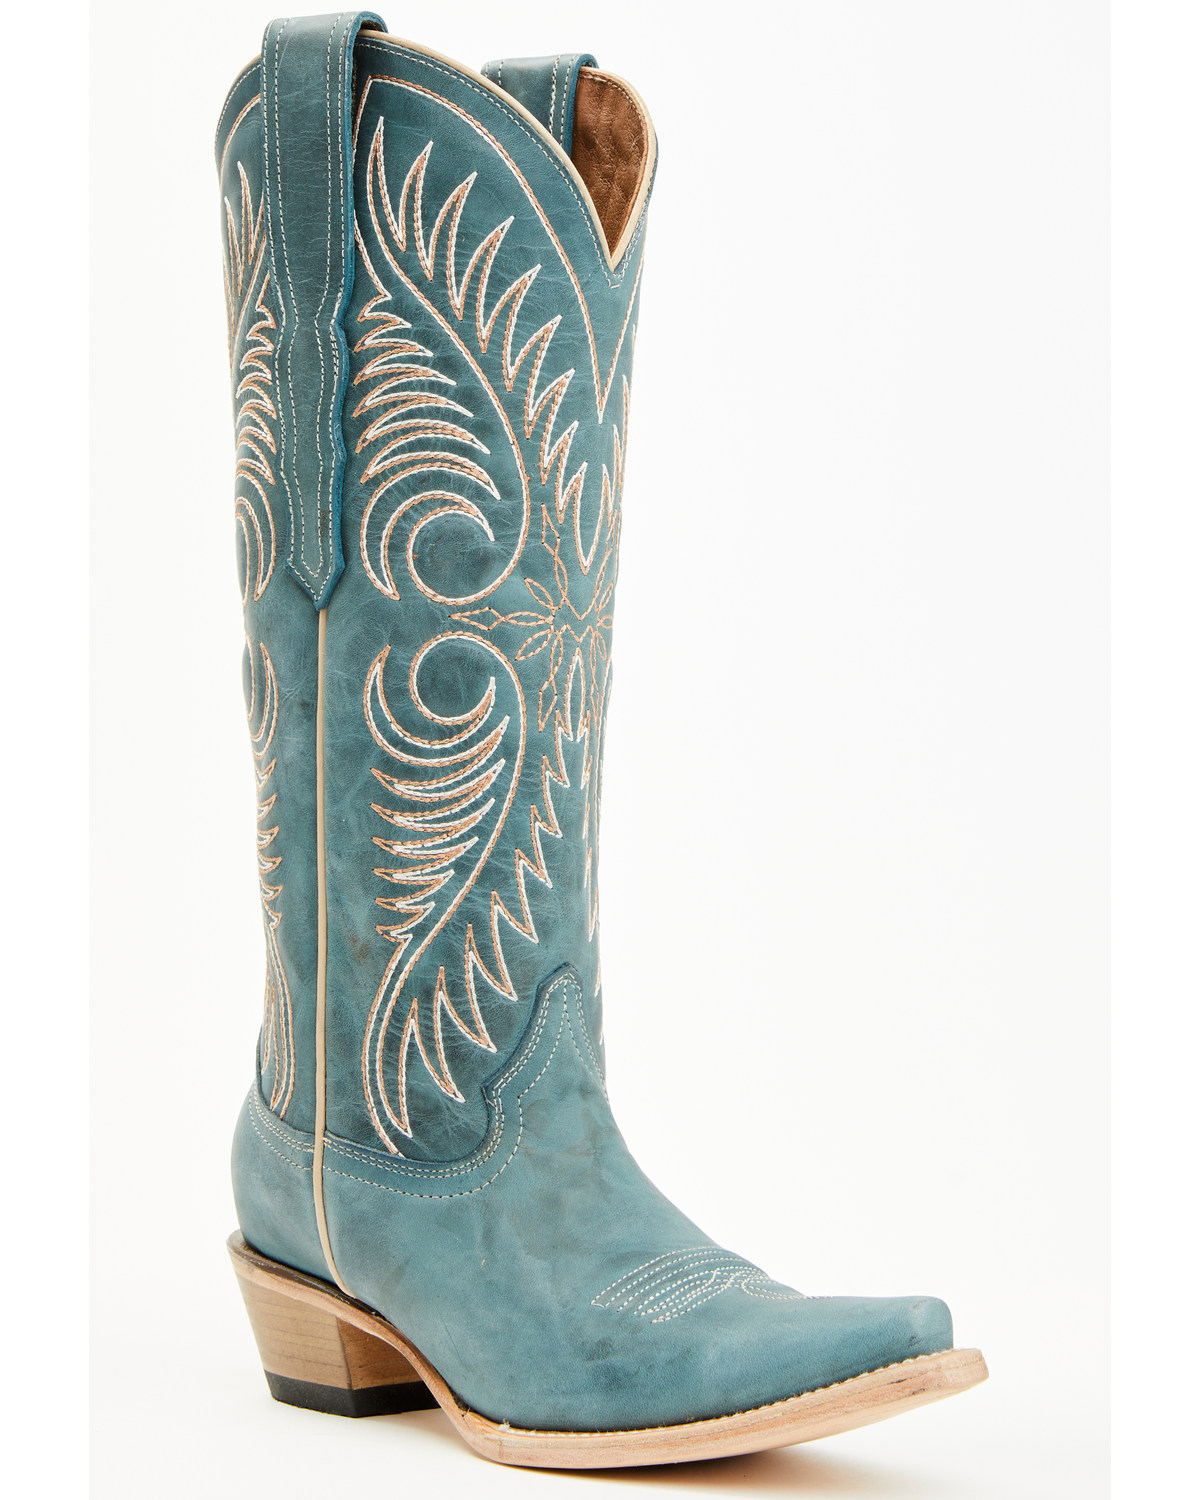 Corral Women's Tall Western Boots